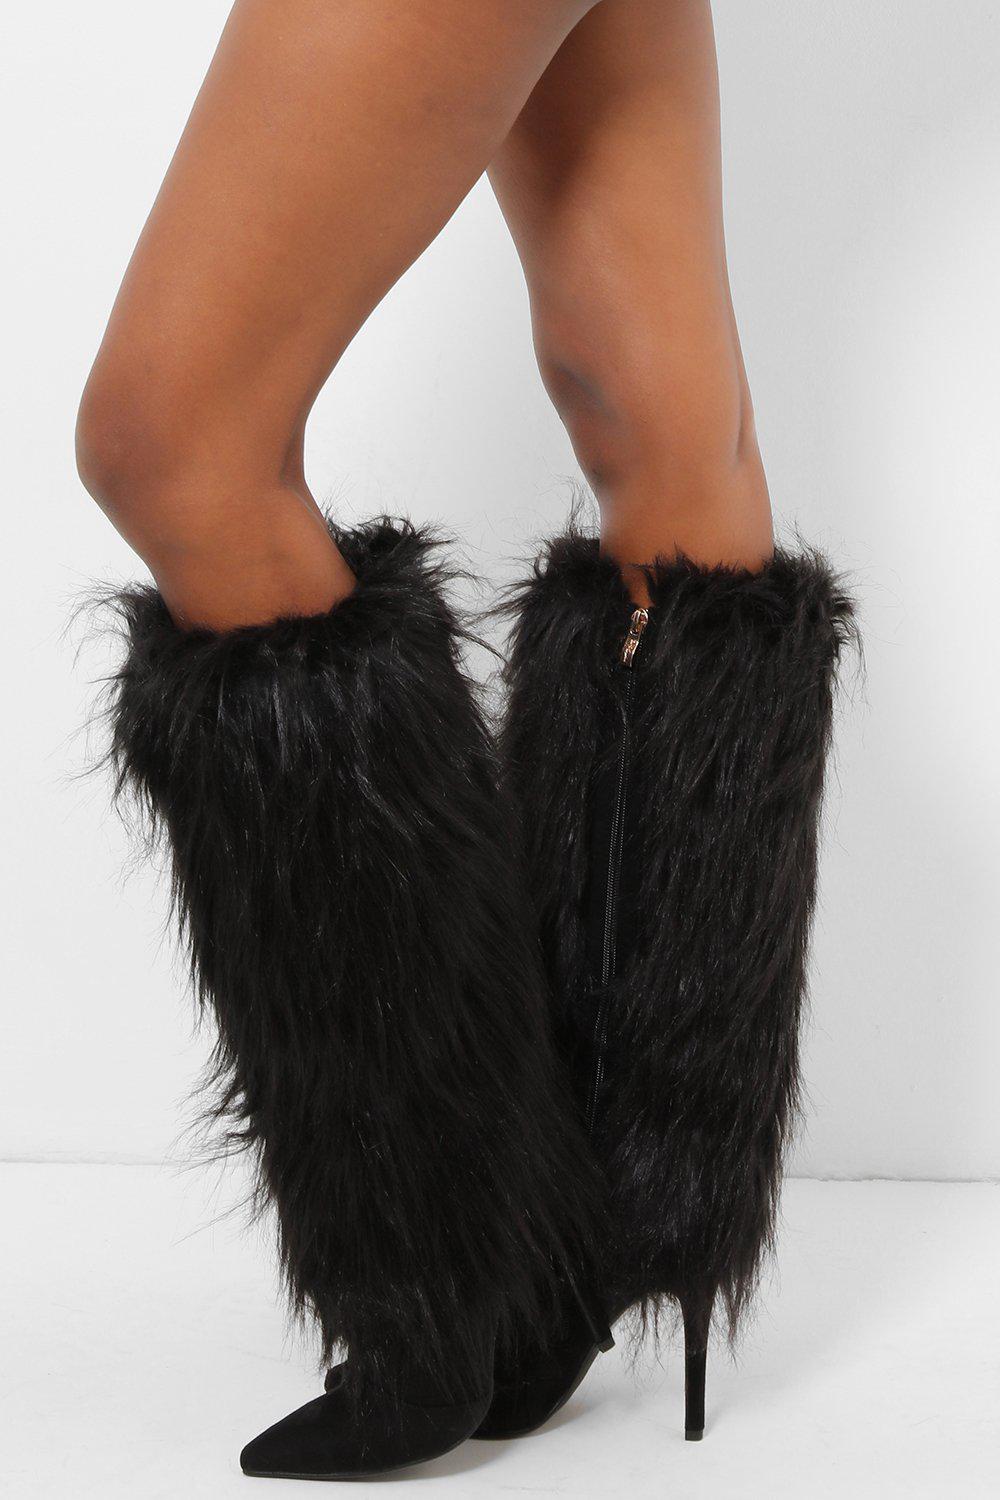 Get Black Tall Faux Fur Calf Stiletto Boots for only £5.00 exclusively ...